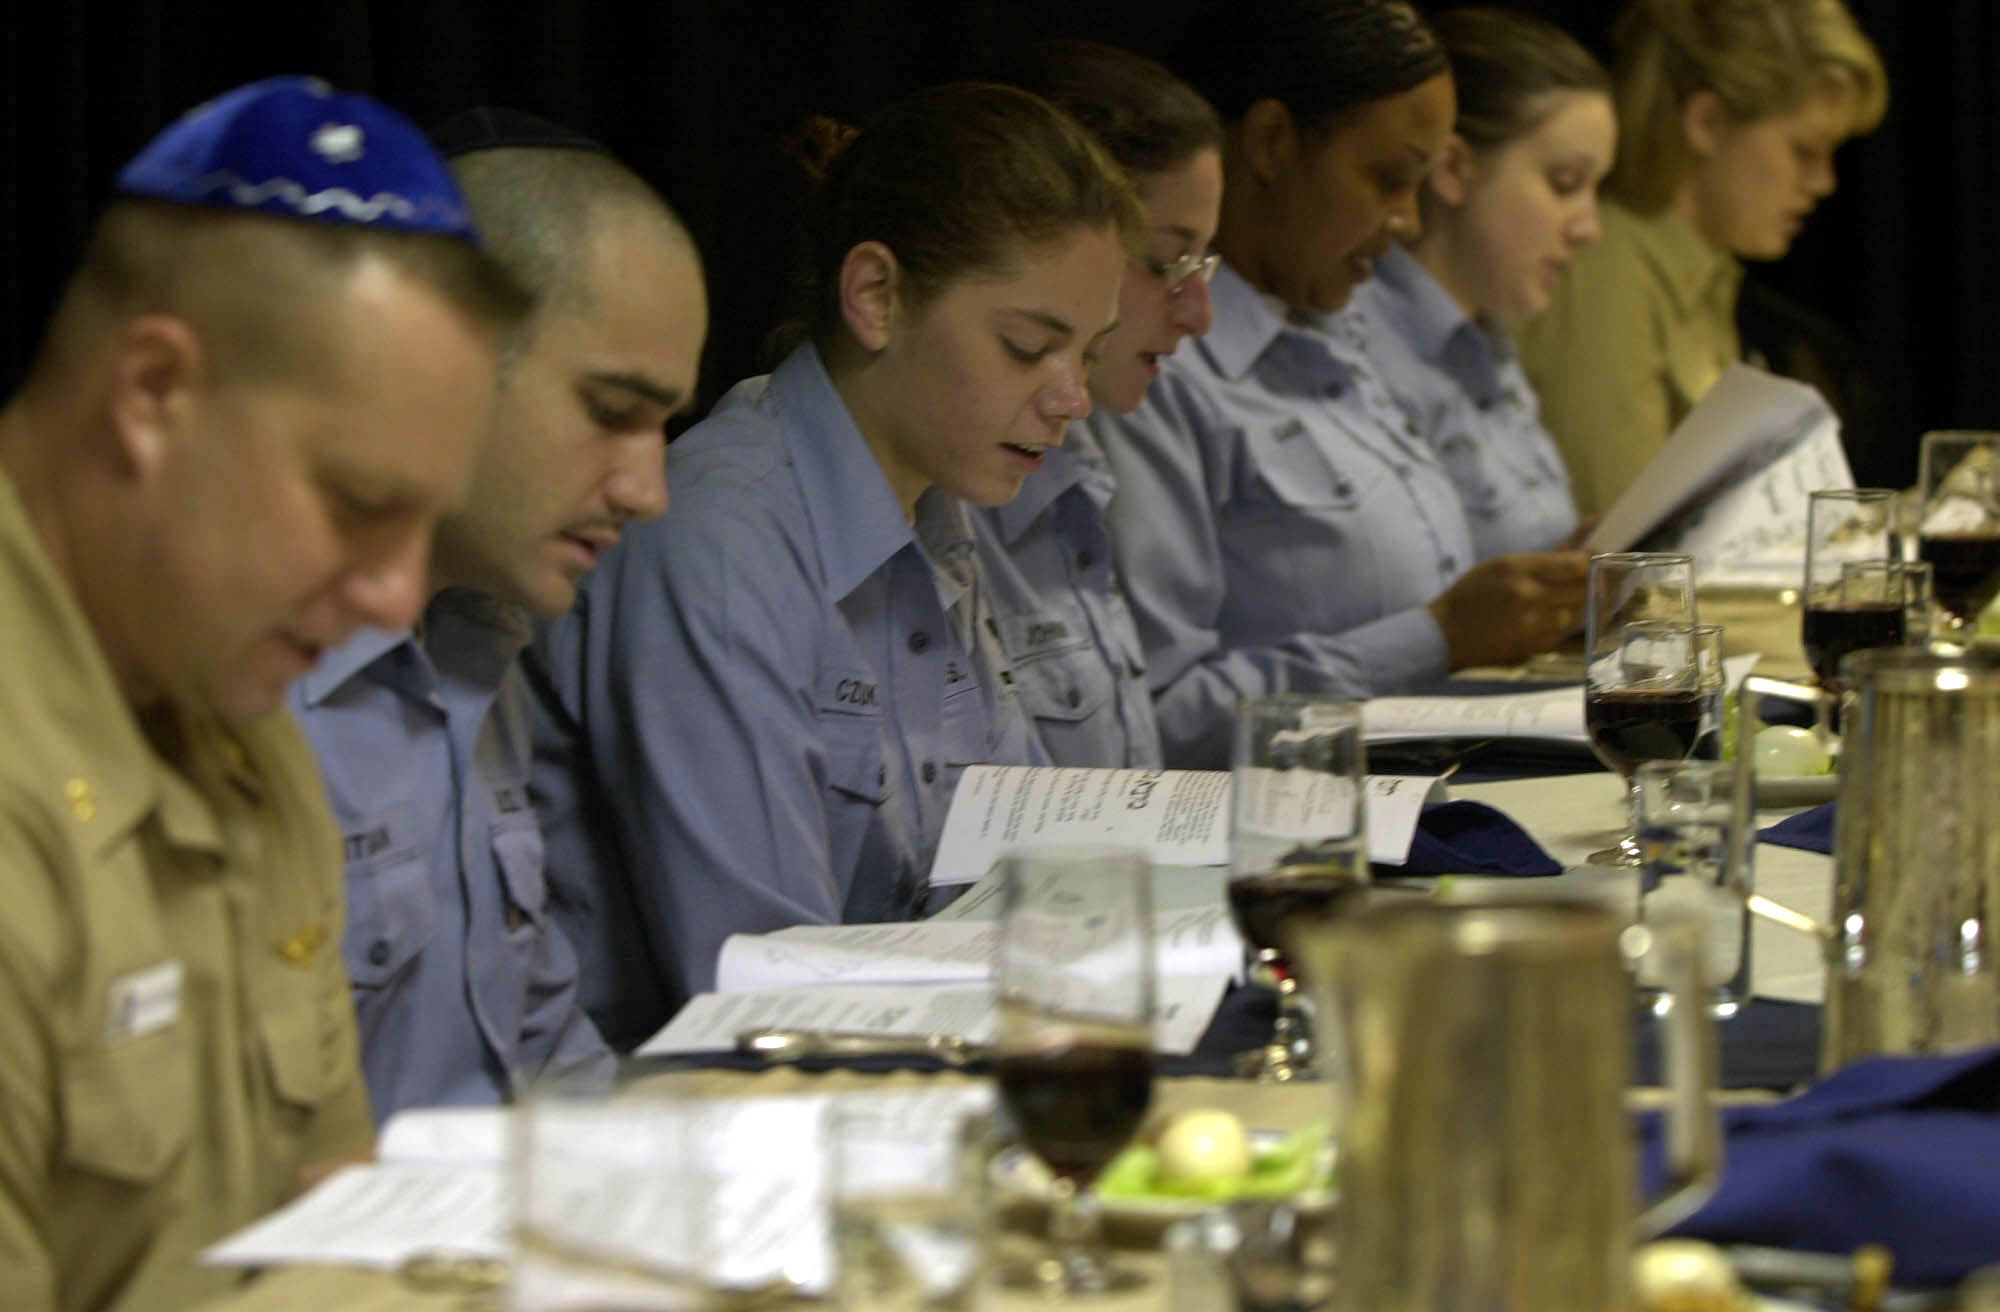 US Navy Crewmembers read from the Passover Hagaddah during the Passover Seder dinner in the wardroom aboard USS Nimitz 